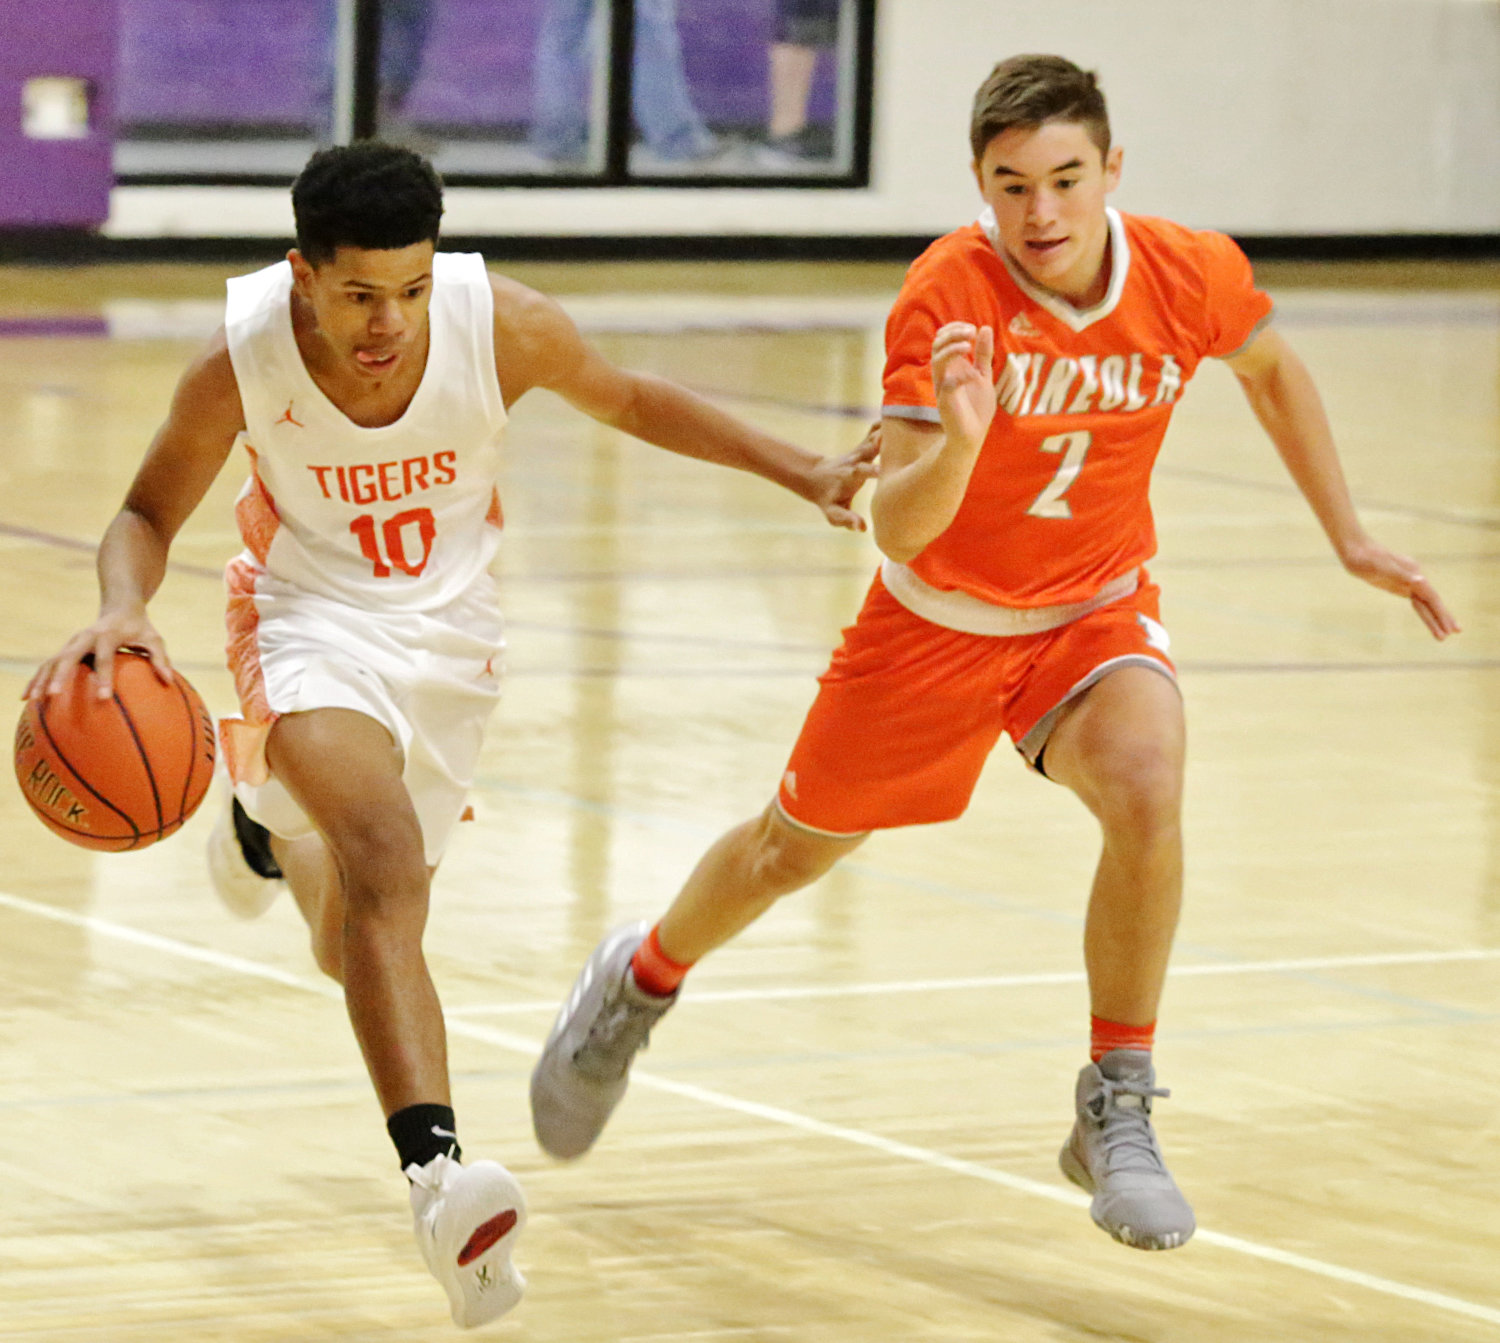 T.J. Moreland, right, of Mineola presses the ball in tourney play against Commerce.